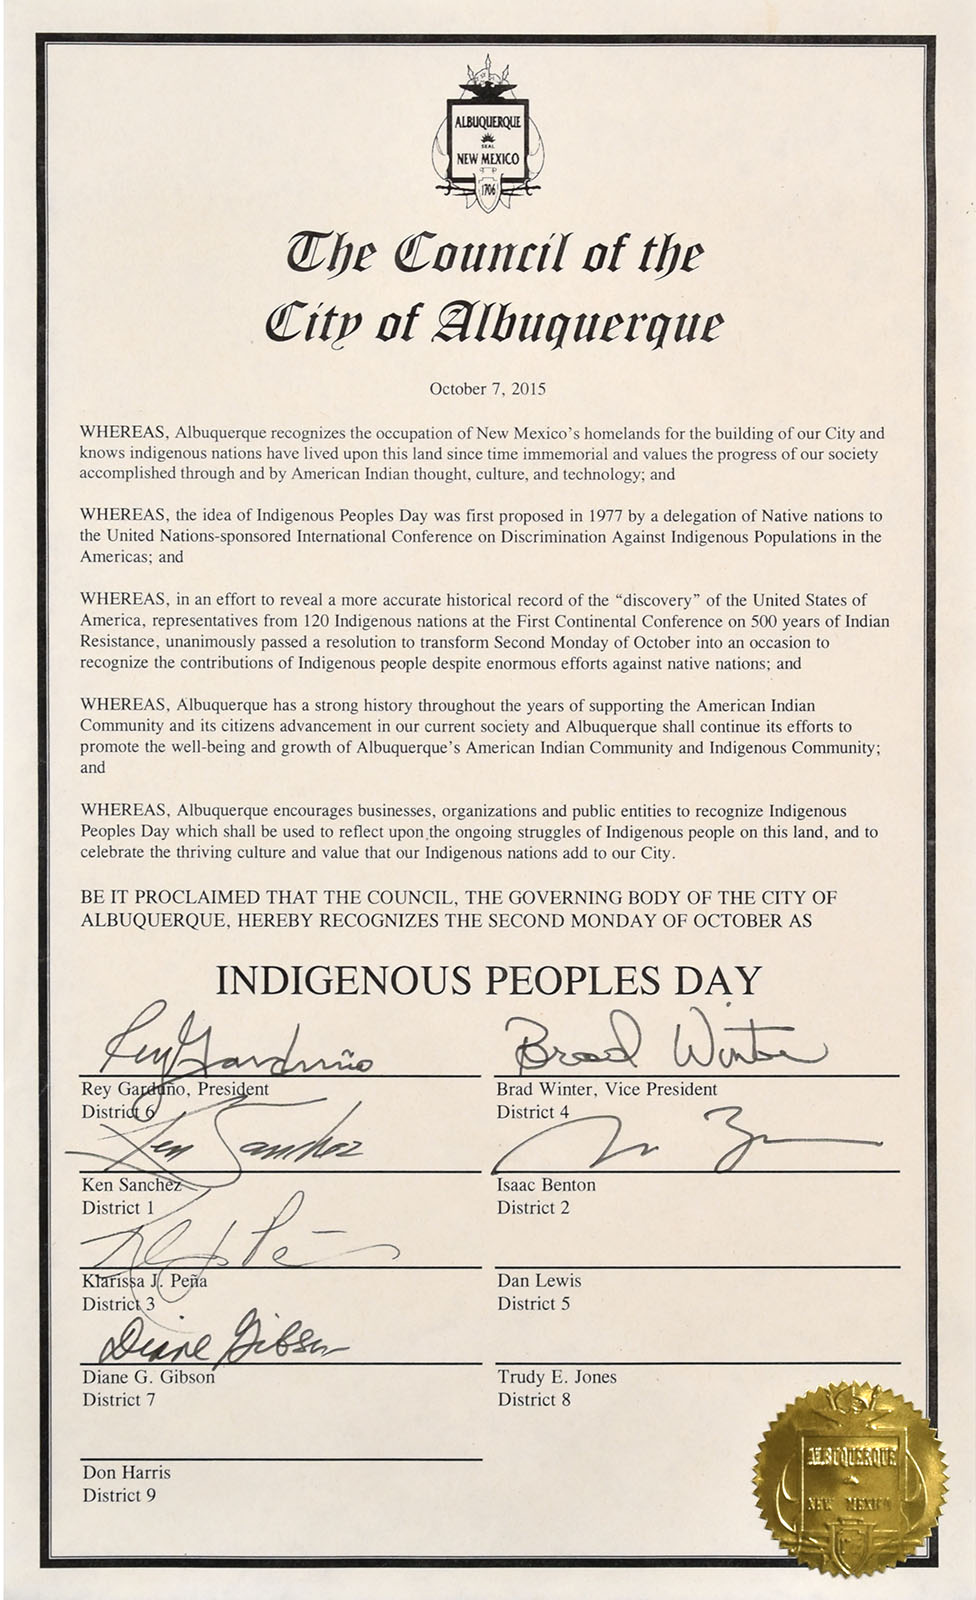 City of Albuquerque Proclamation on Indigenous Peoples’ Day